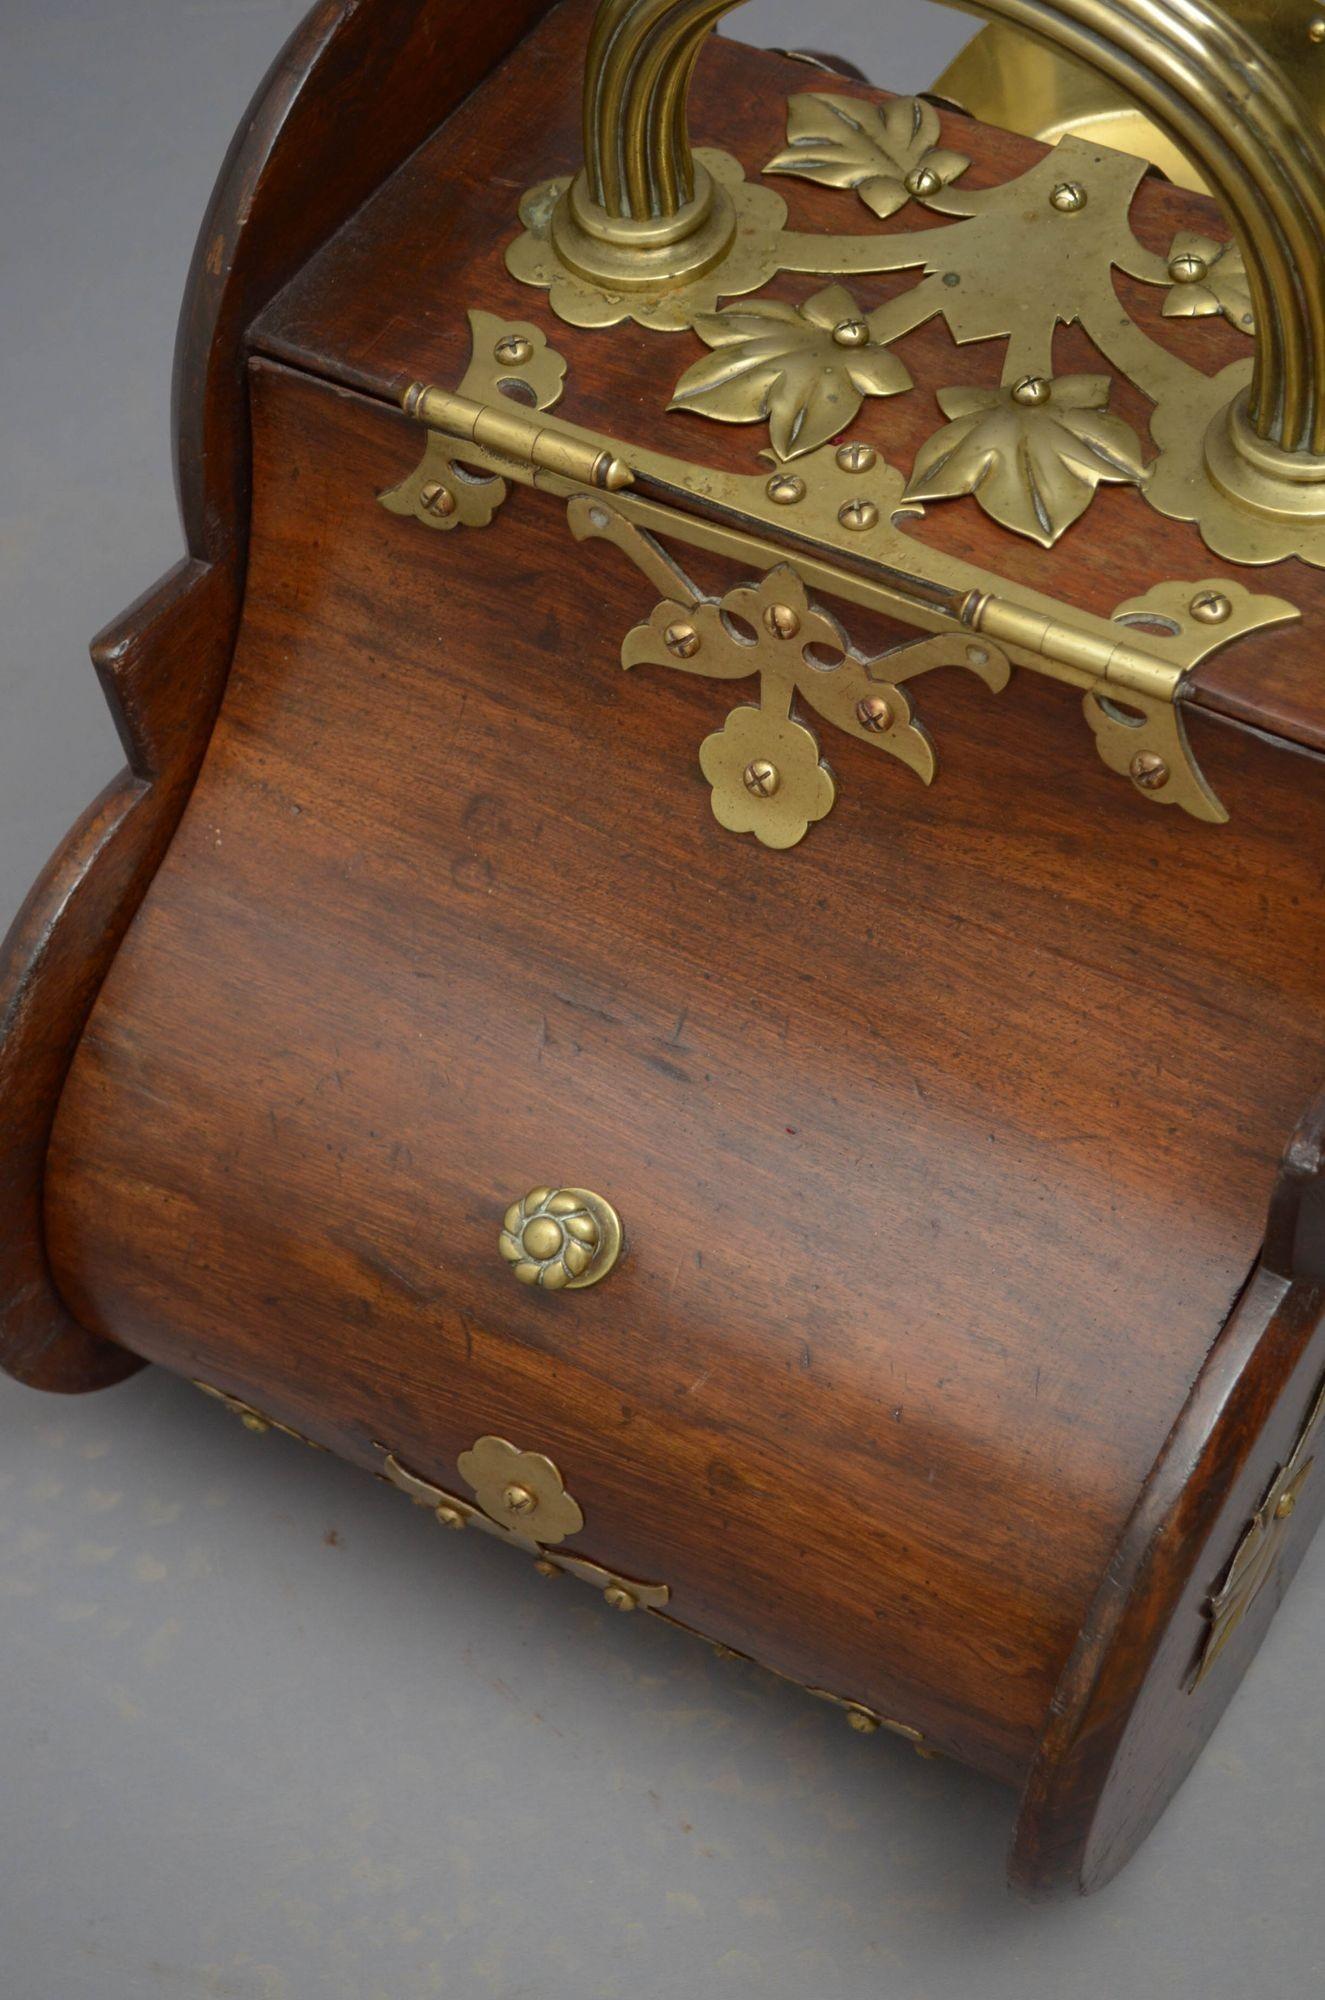 Sn4932 Victorian walnut coal bin with brass carry handle, a shovel and original liner, all with decorative brasses throughout and date lozenge. This antique coal scuttle bears some signs of usage. Ready to place at home. c1880
H18